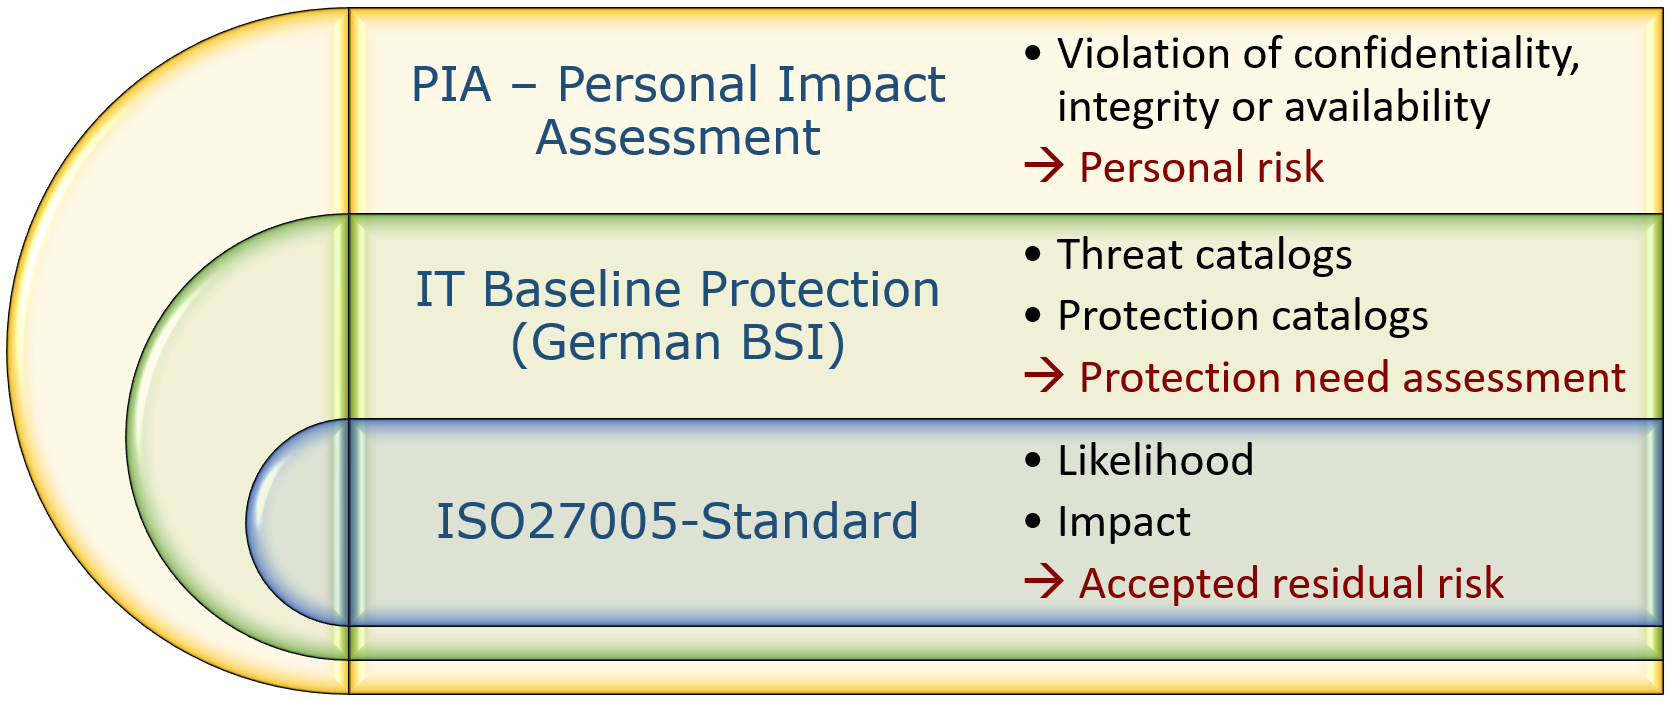 Image: risk methods overview - ISO27005 Standard (accepted residual risk), IT baseline protection (German BSI, protection need assessment), PIA - personal impact assessment